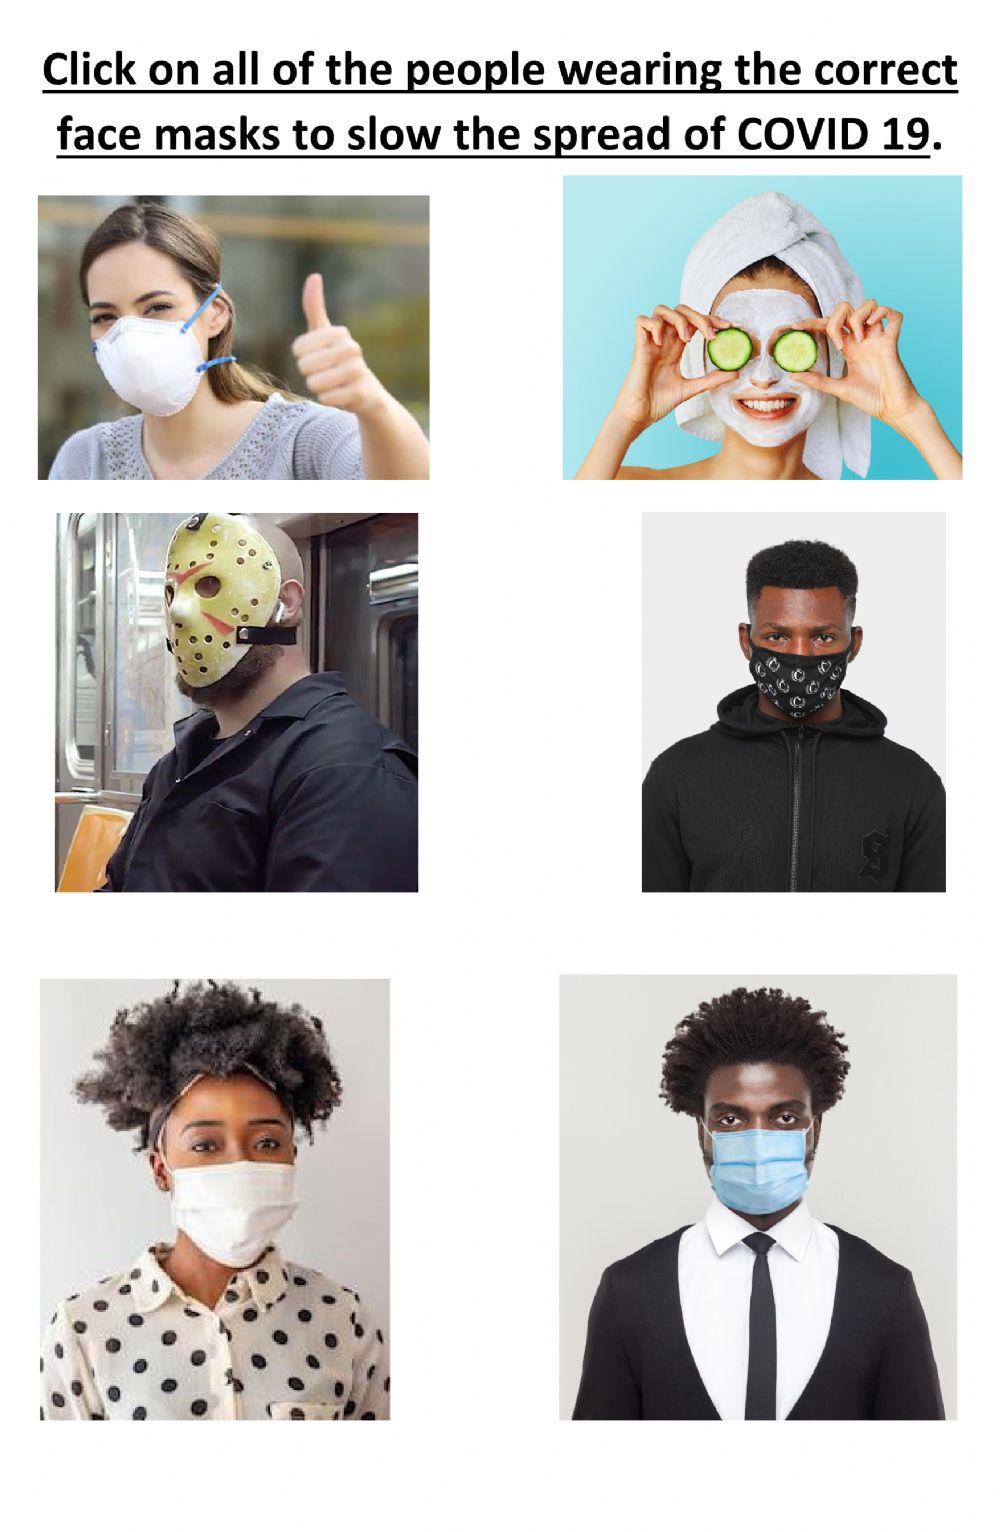 Wearing the correct type of mask